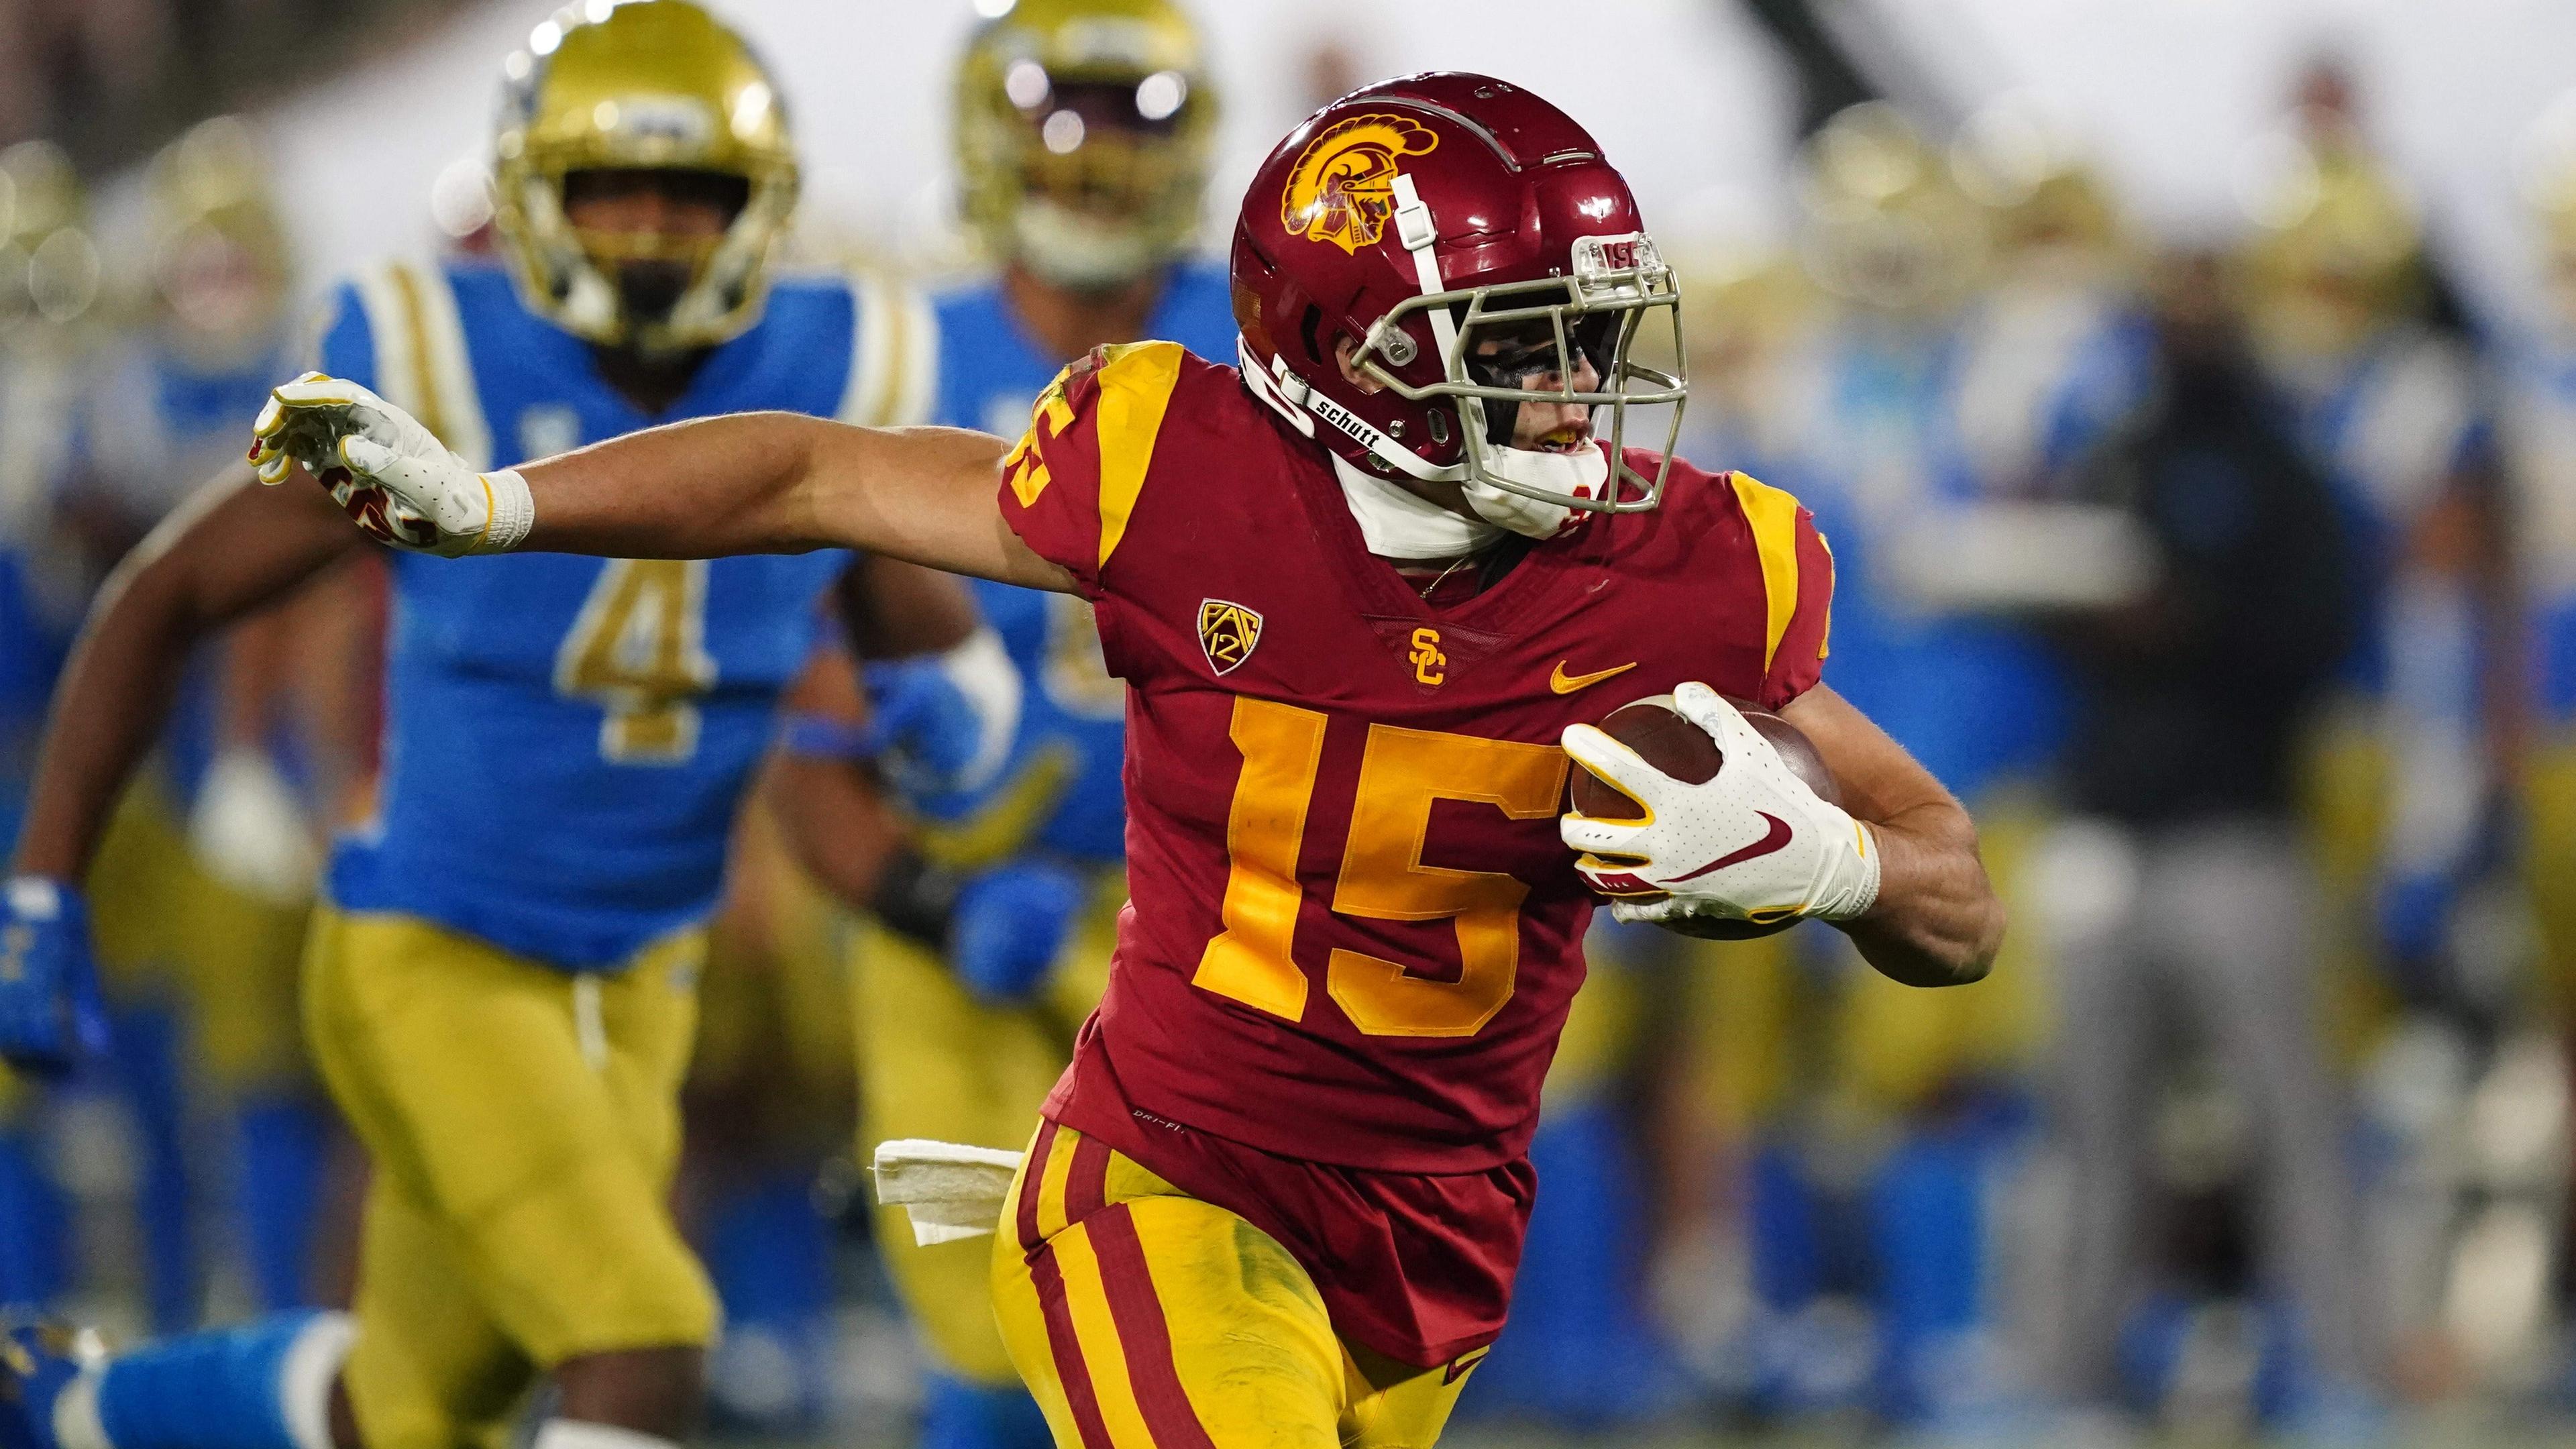 Southern California Trojans wide receiver Drake London (15) scores on a 65 yard touchdown reception in the second quarter against the UCLA Bruins at Rose Bowl. / Kirby Lee-USA TODAY Sports